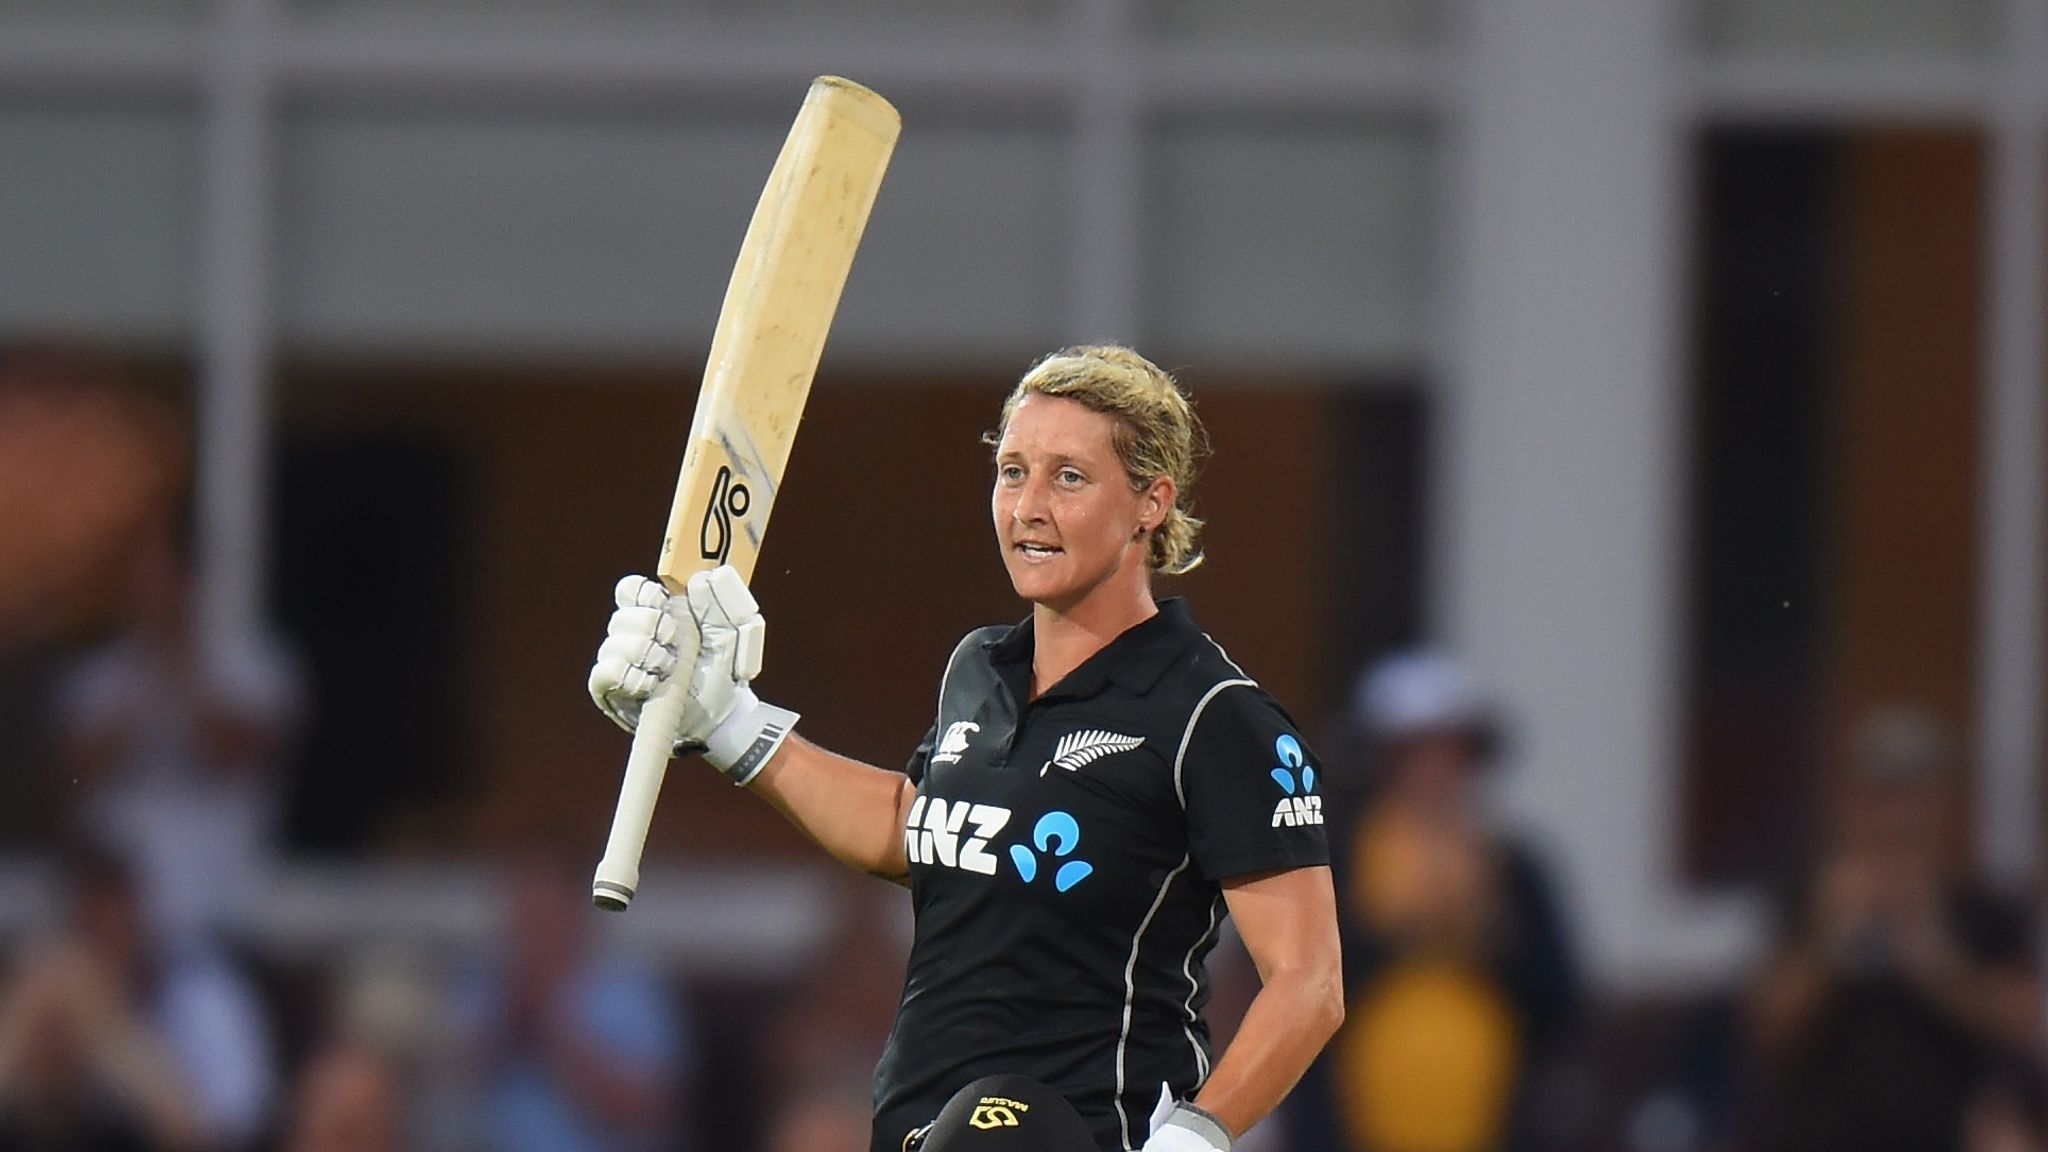 Sophie Devine believes getting back to basics is key to success for New Zealand | Cricket News | Sky Sports